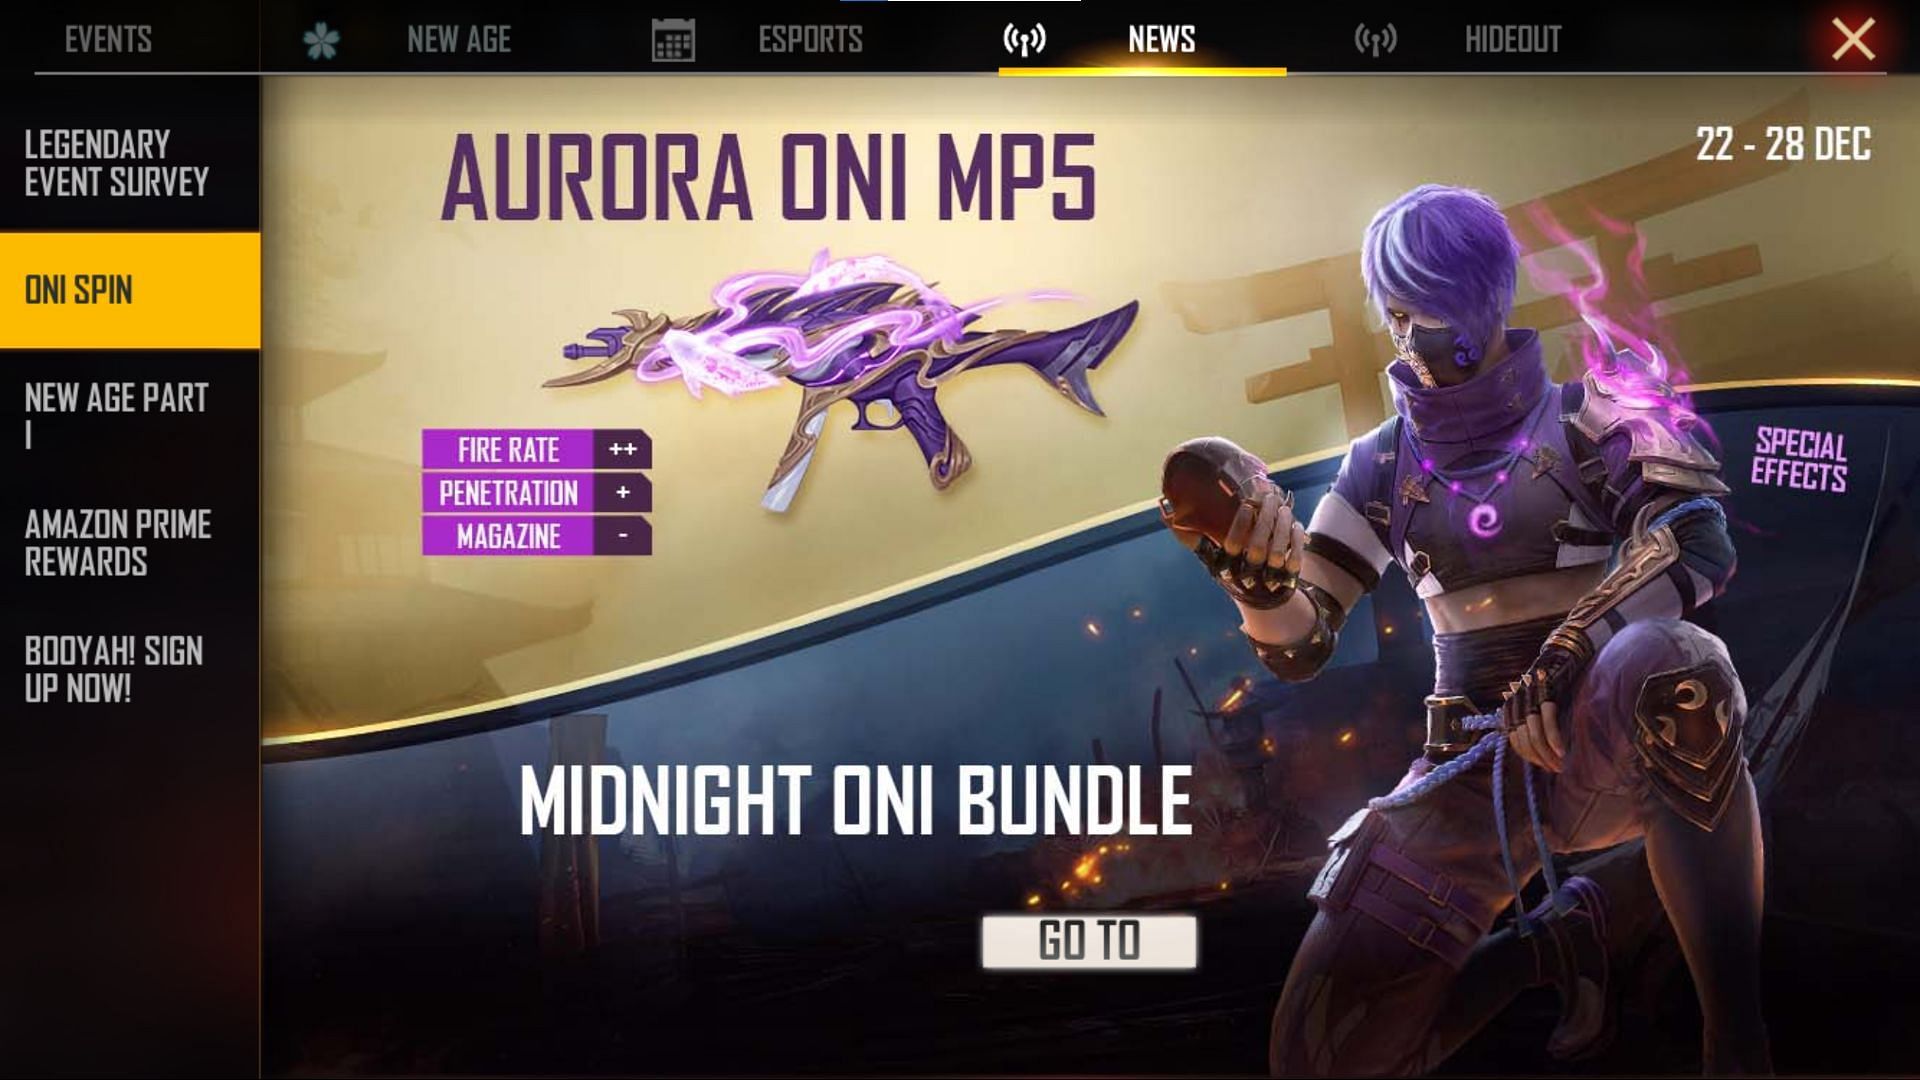 At present users can access the event from the news tab (Image via Free Fire)